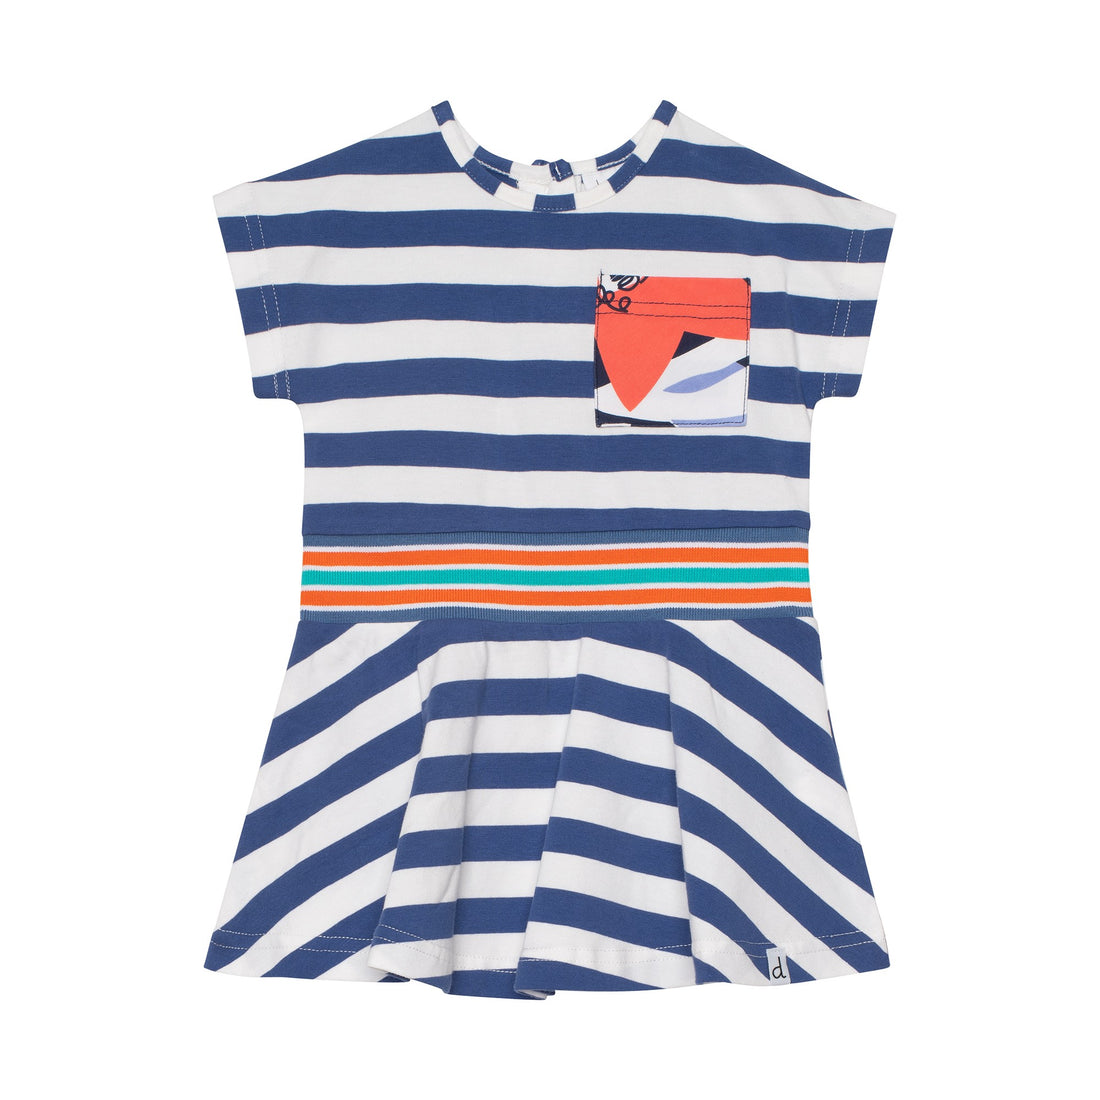 ORGANIC COTTON STRIPED DRESS WITH POCKET, BABY GIRL & GIRL